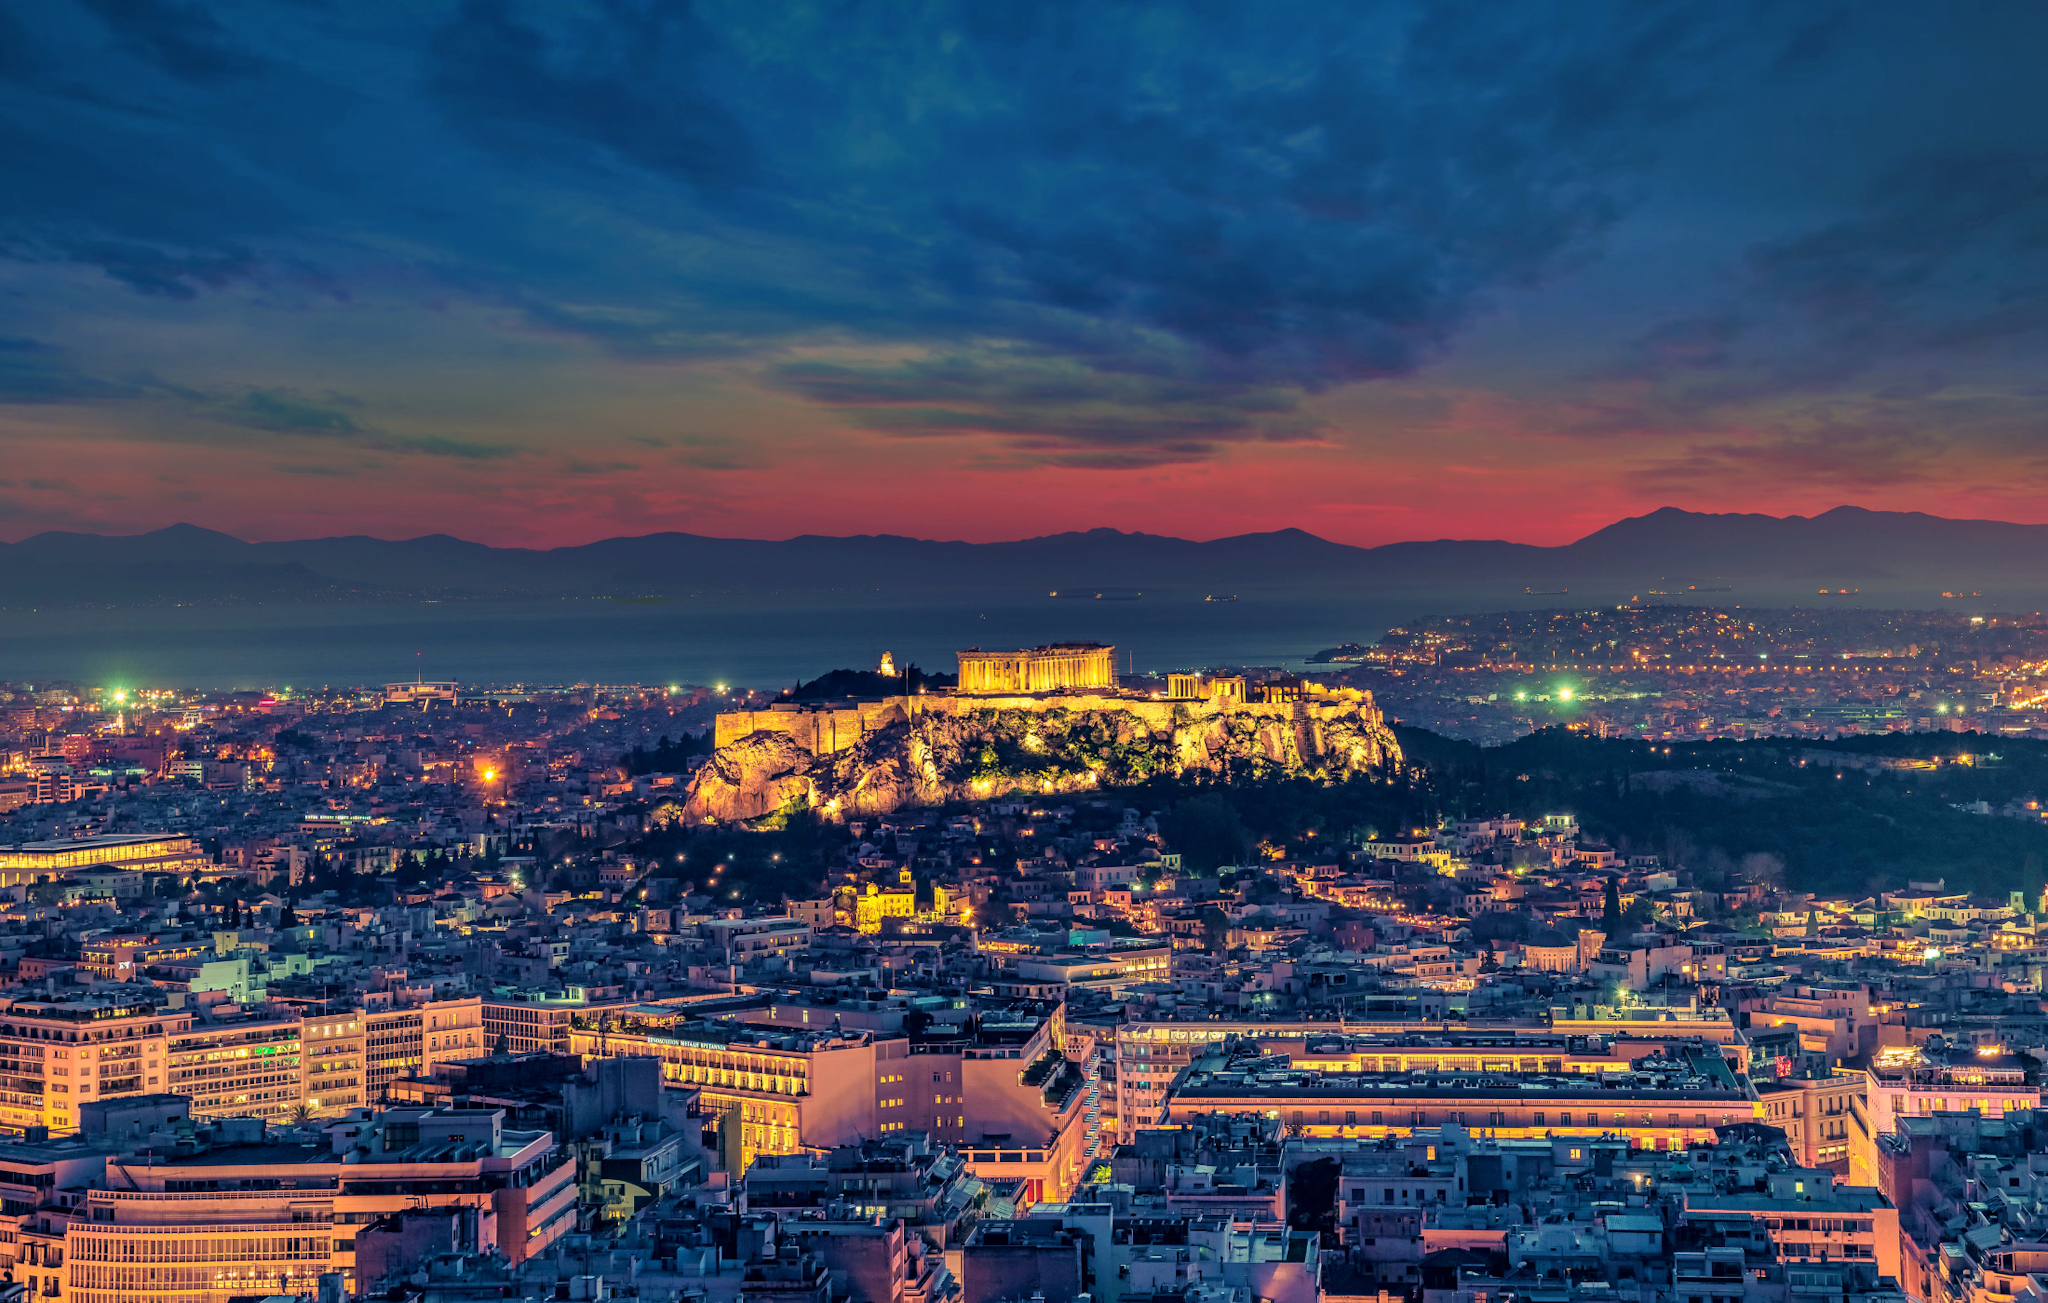 Acropolis Athens Sunset Greece
Canva - https://www.canva.com/photos/MAETqAUWo2Y-city-with-high-rise-buildings-under-orange-and-blue-sky/